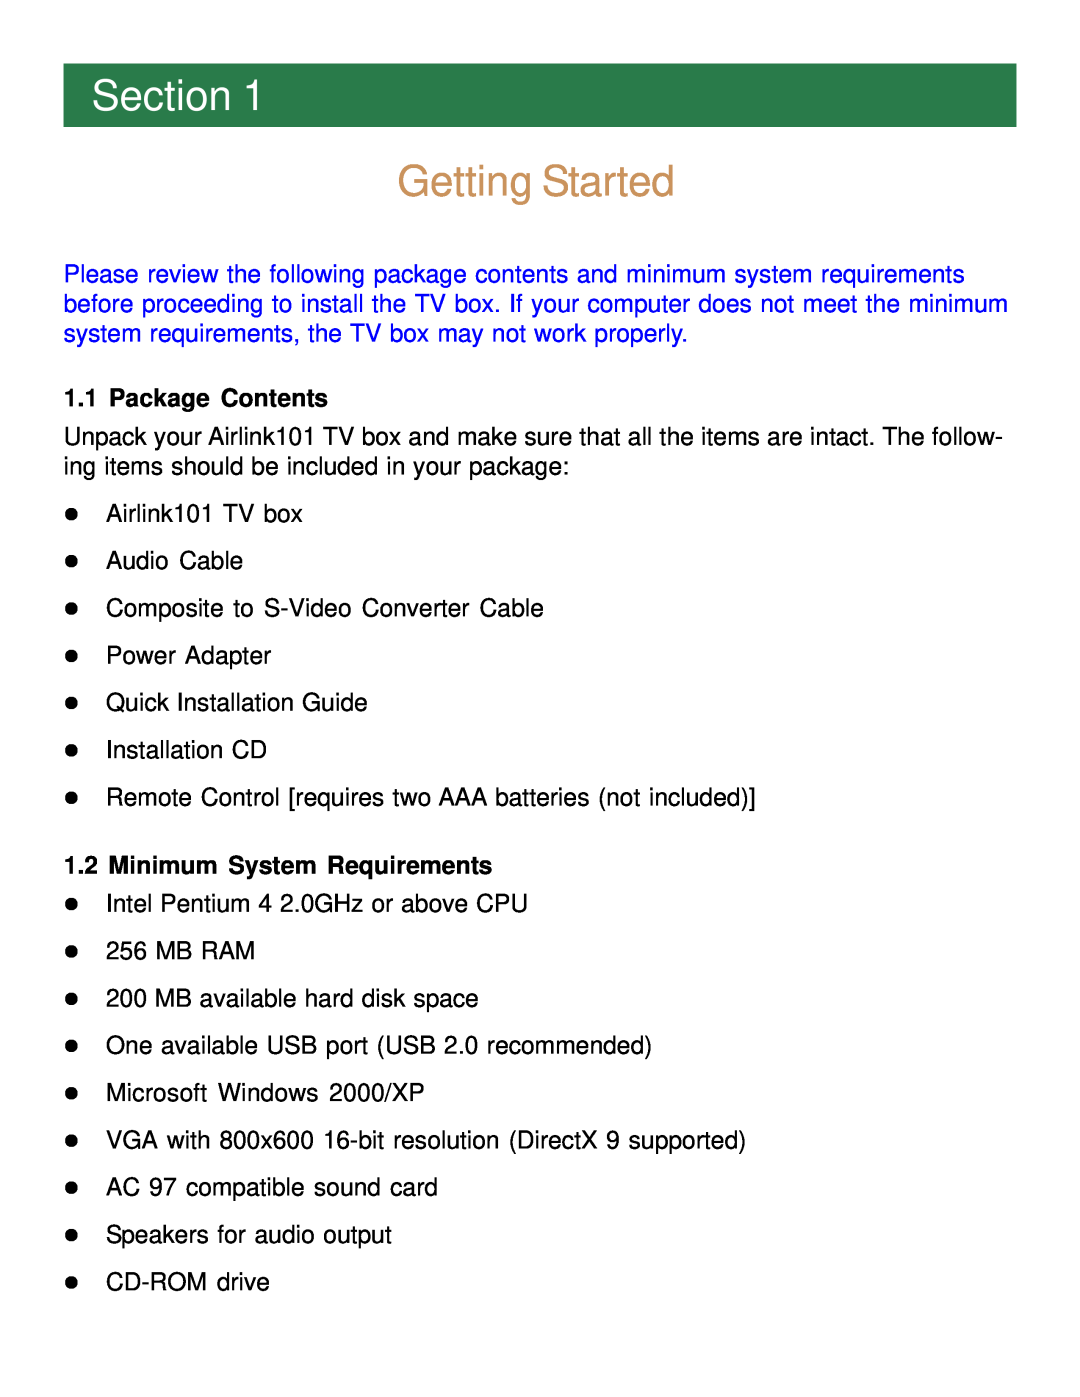 Airlink101 ATVUSB05 manual Section, Getting Started, Package Contents, Minimum System Requirements 